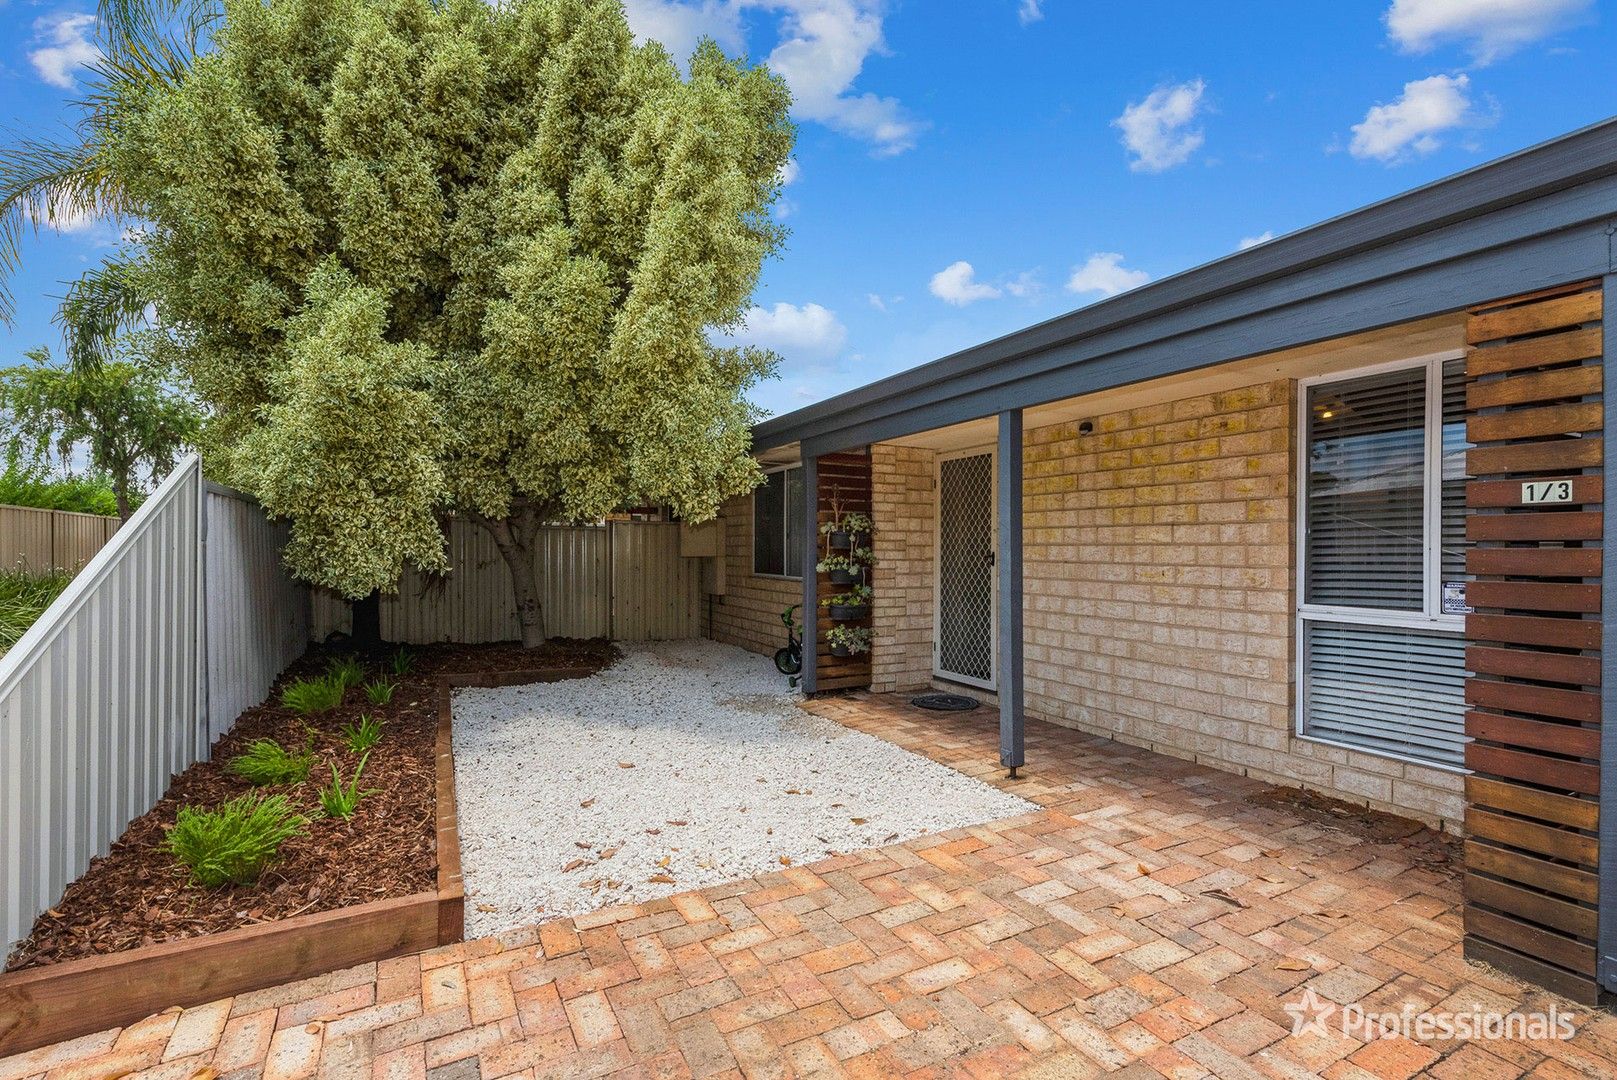 3 bedrooms House in 1/3 Nalya Court COODANUP WA, 6210